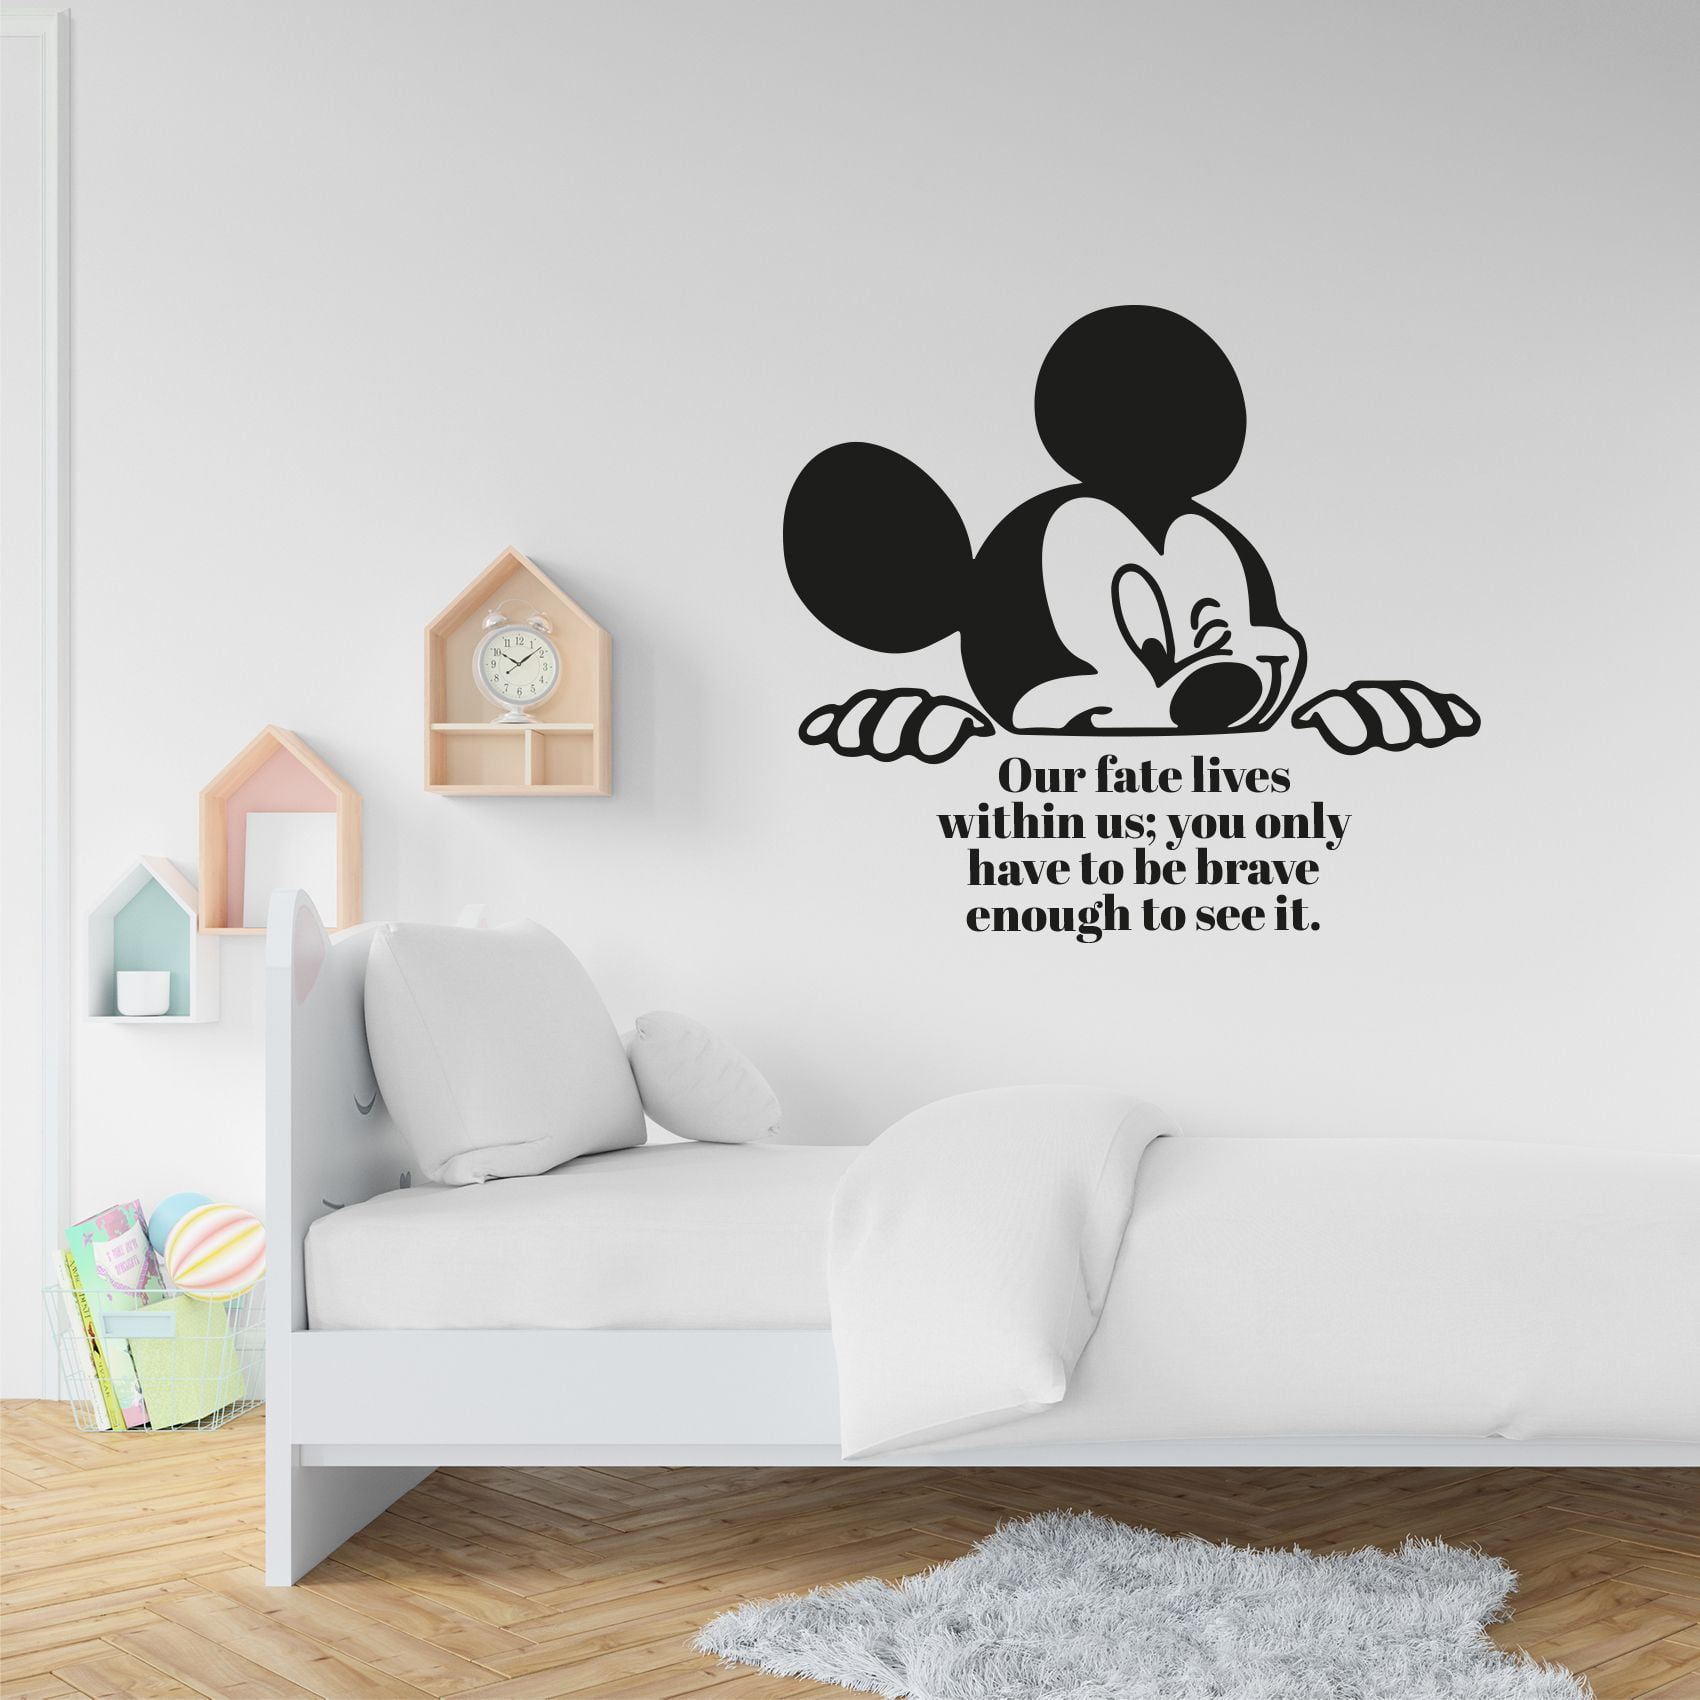 In This House We Do Disney Inspirational Art wall Sticker Quote Decal New 